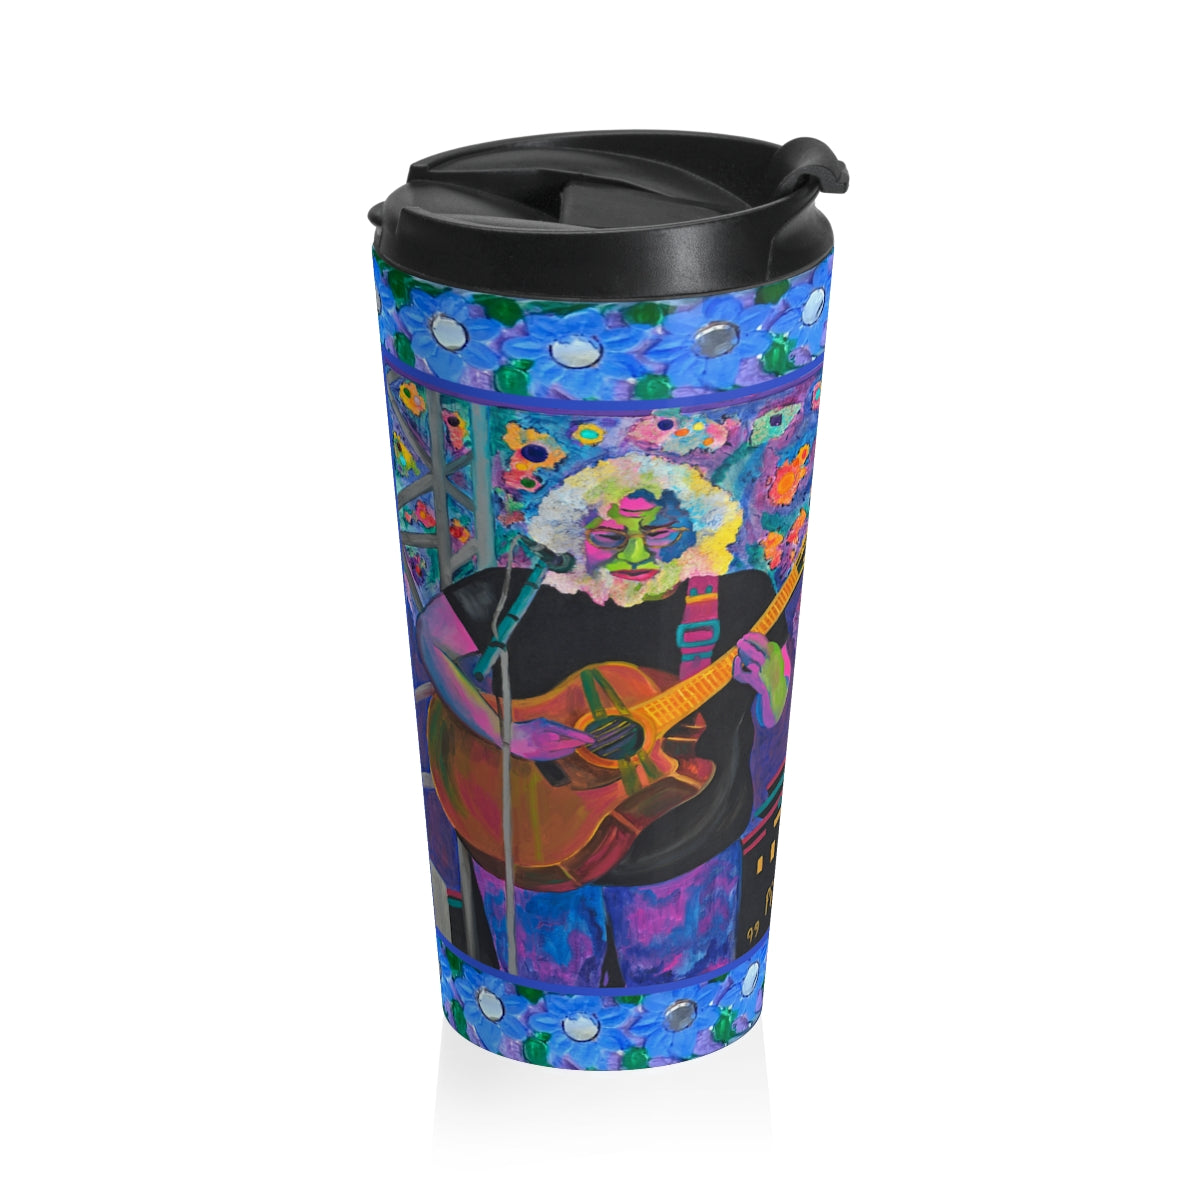 "Jerry Among the Stars" Stainless Steel Travel Mug